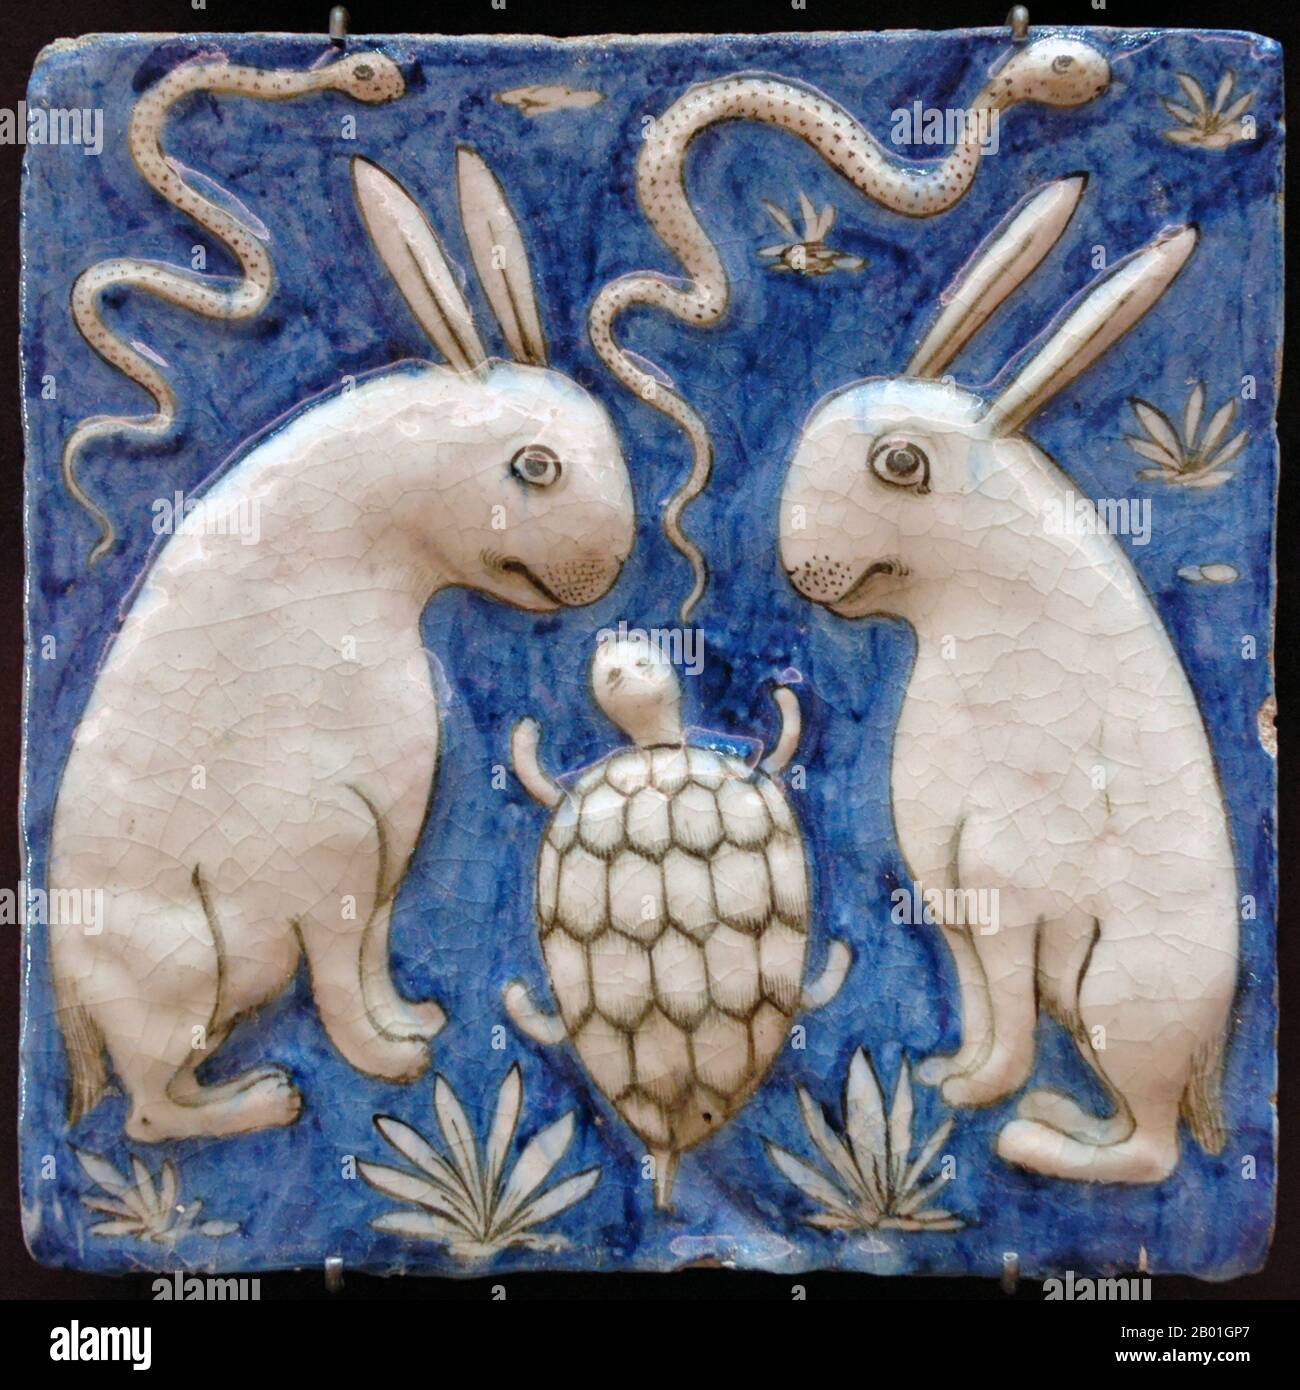 Iran/Persia: A ceramic tile with two rabbits, two snakes and a tortoise. Illustration from Zakarīyā ibn Muḥammad al-Qazwīnī, ‘Ajā’ib al-makhlūqāt wa-gharā’ib al-mawjūdāt (Marvels of Things Created and Miraculous Aspects of Things Existing, 1537-1538 CE). Earthenware, molded and underglaze-painted decoration, 19th century  Abu Yahya Zakariya' ibn Muhammad al-Qazwini (1203-1283), was a Persian physician, astronomer, geographer and proto-science fiction writer. Stock Photo